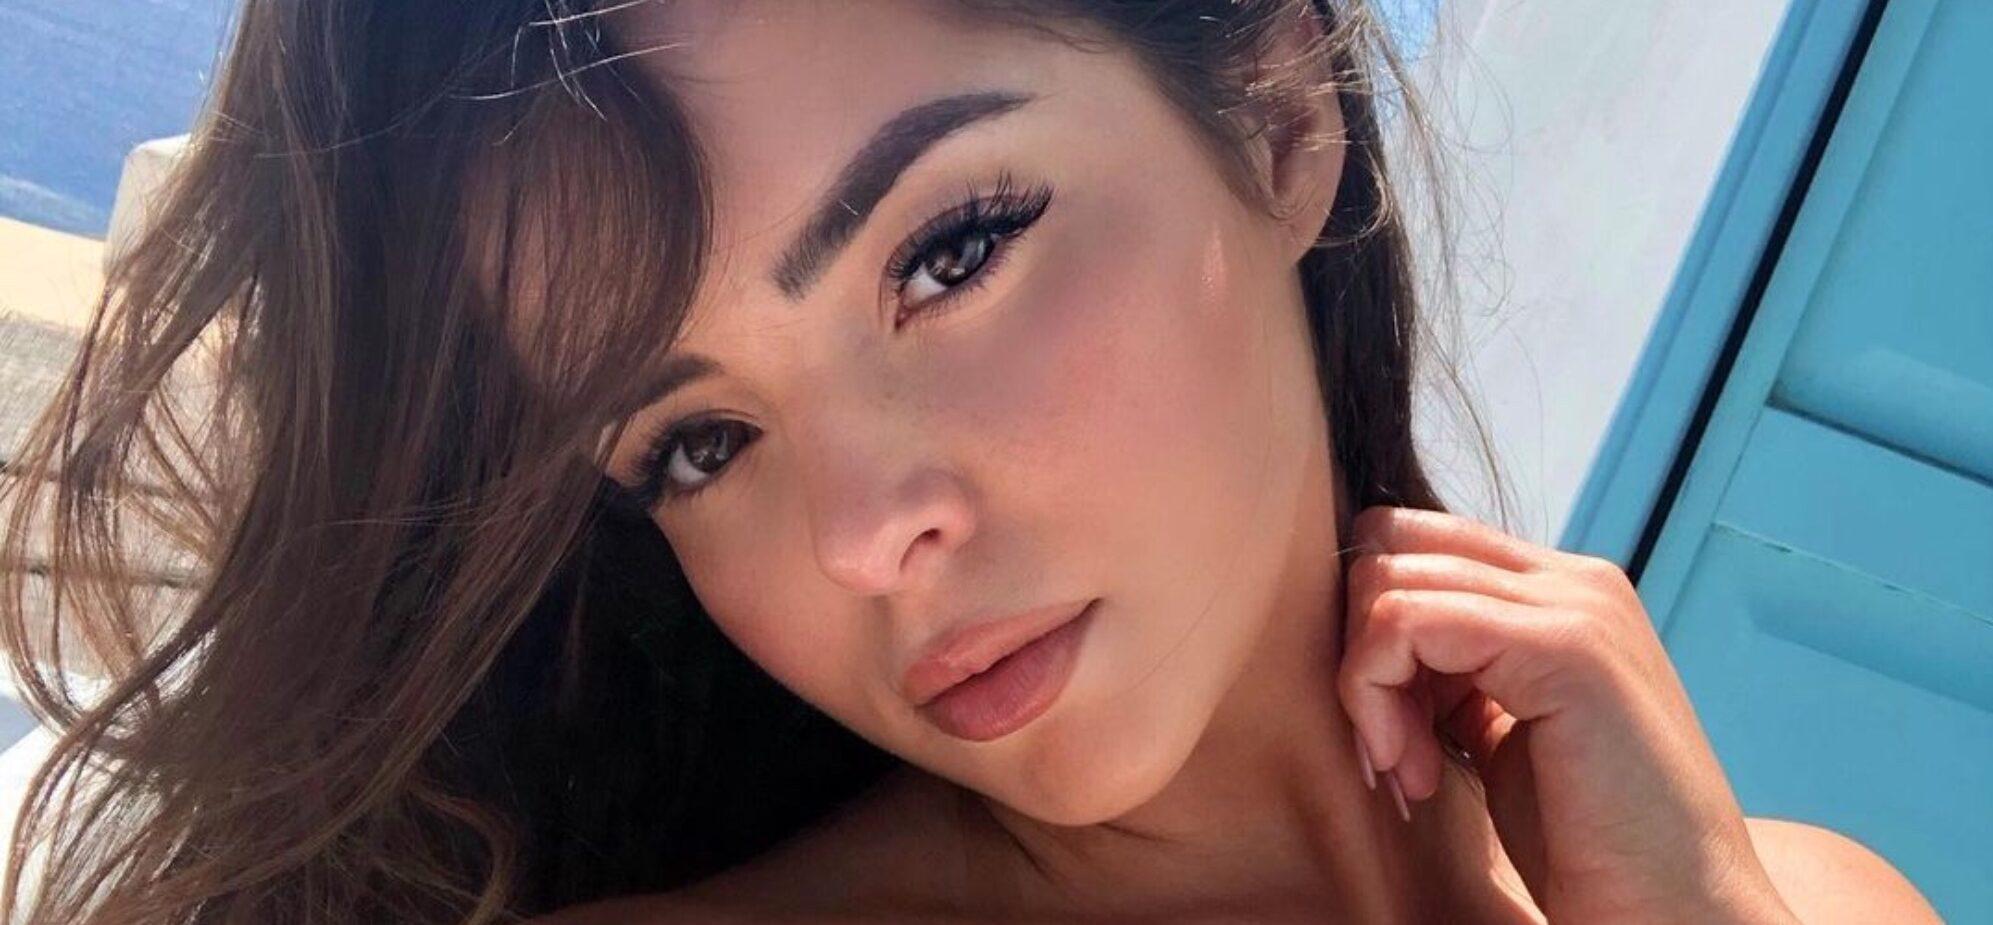 Demi Rose In Her Skintight, See-Through Teddy Sets The ‘Mood’